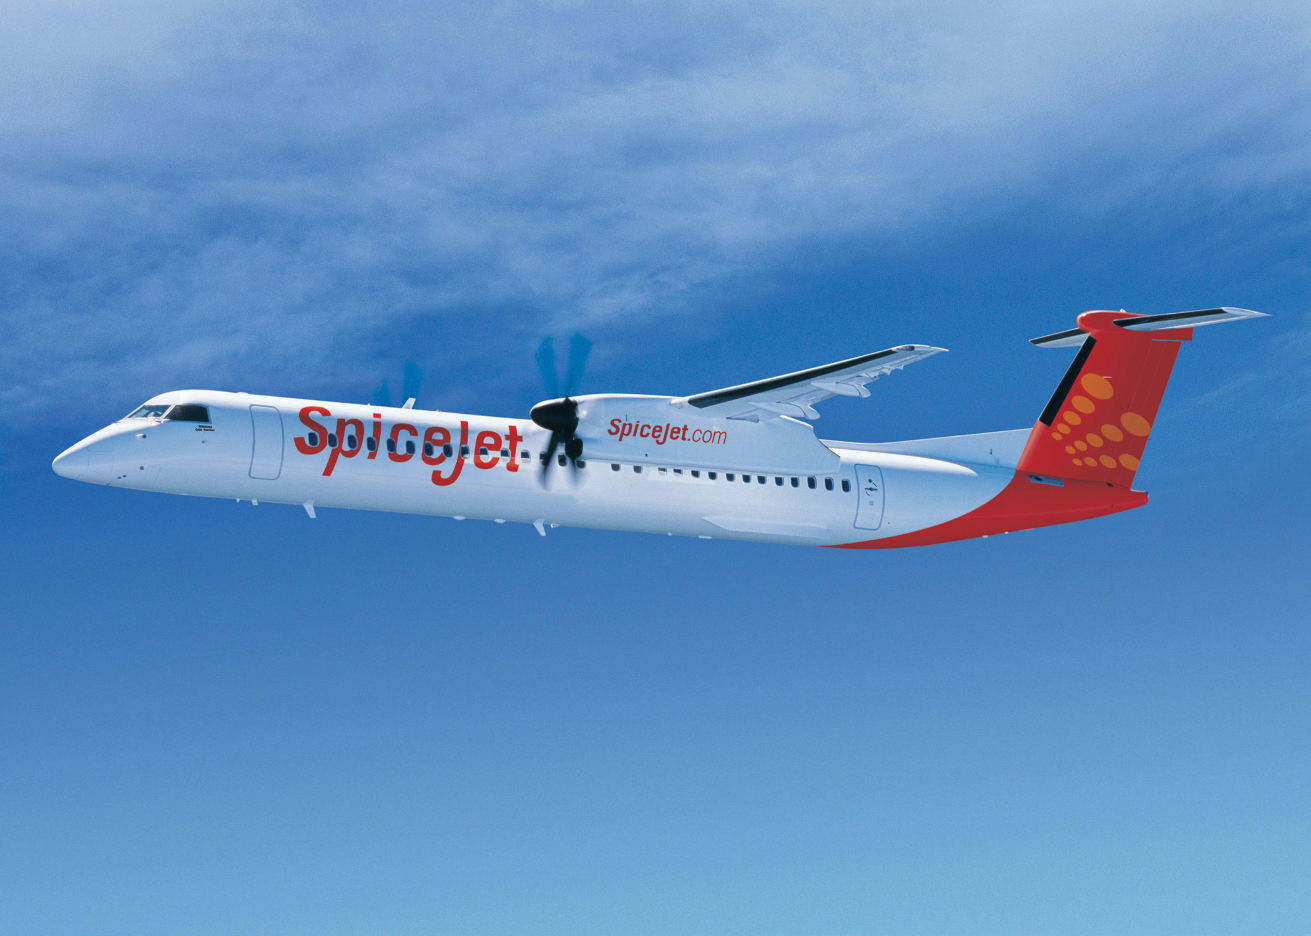 SpiceJet completes India’s first biofuel flight